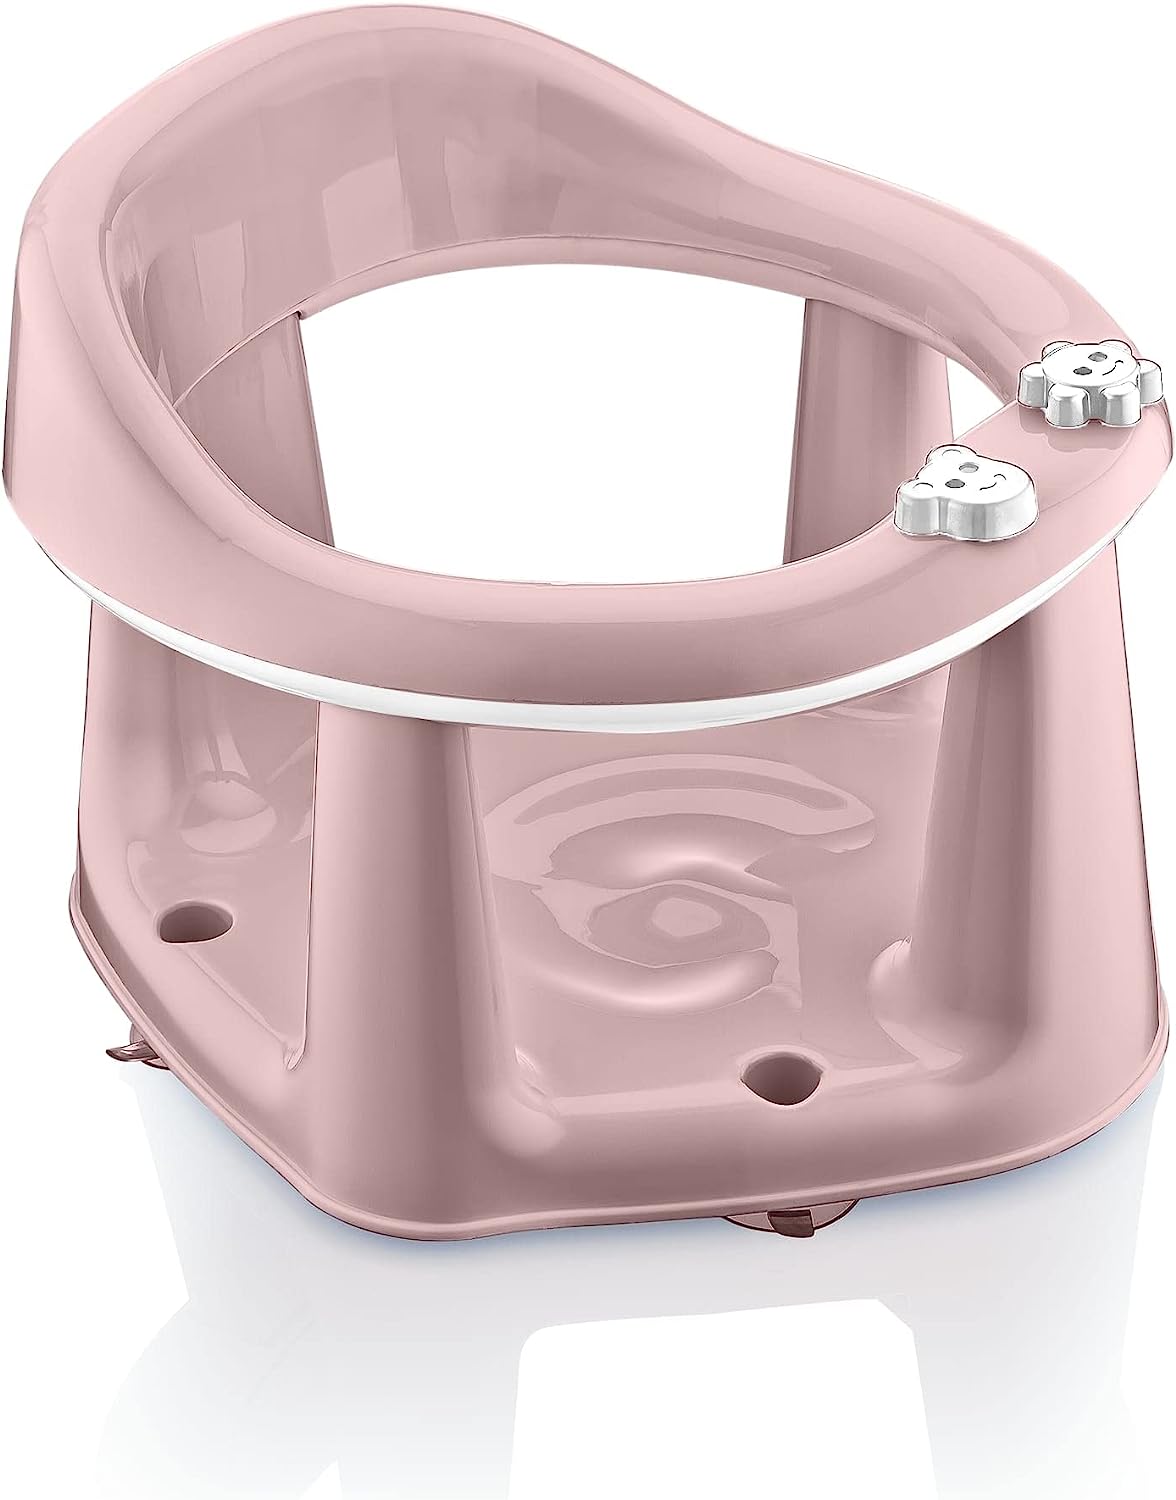 3 in 1 Baby Toddler Child Bath Support Seat Pastel Pink